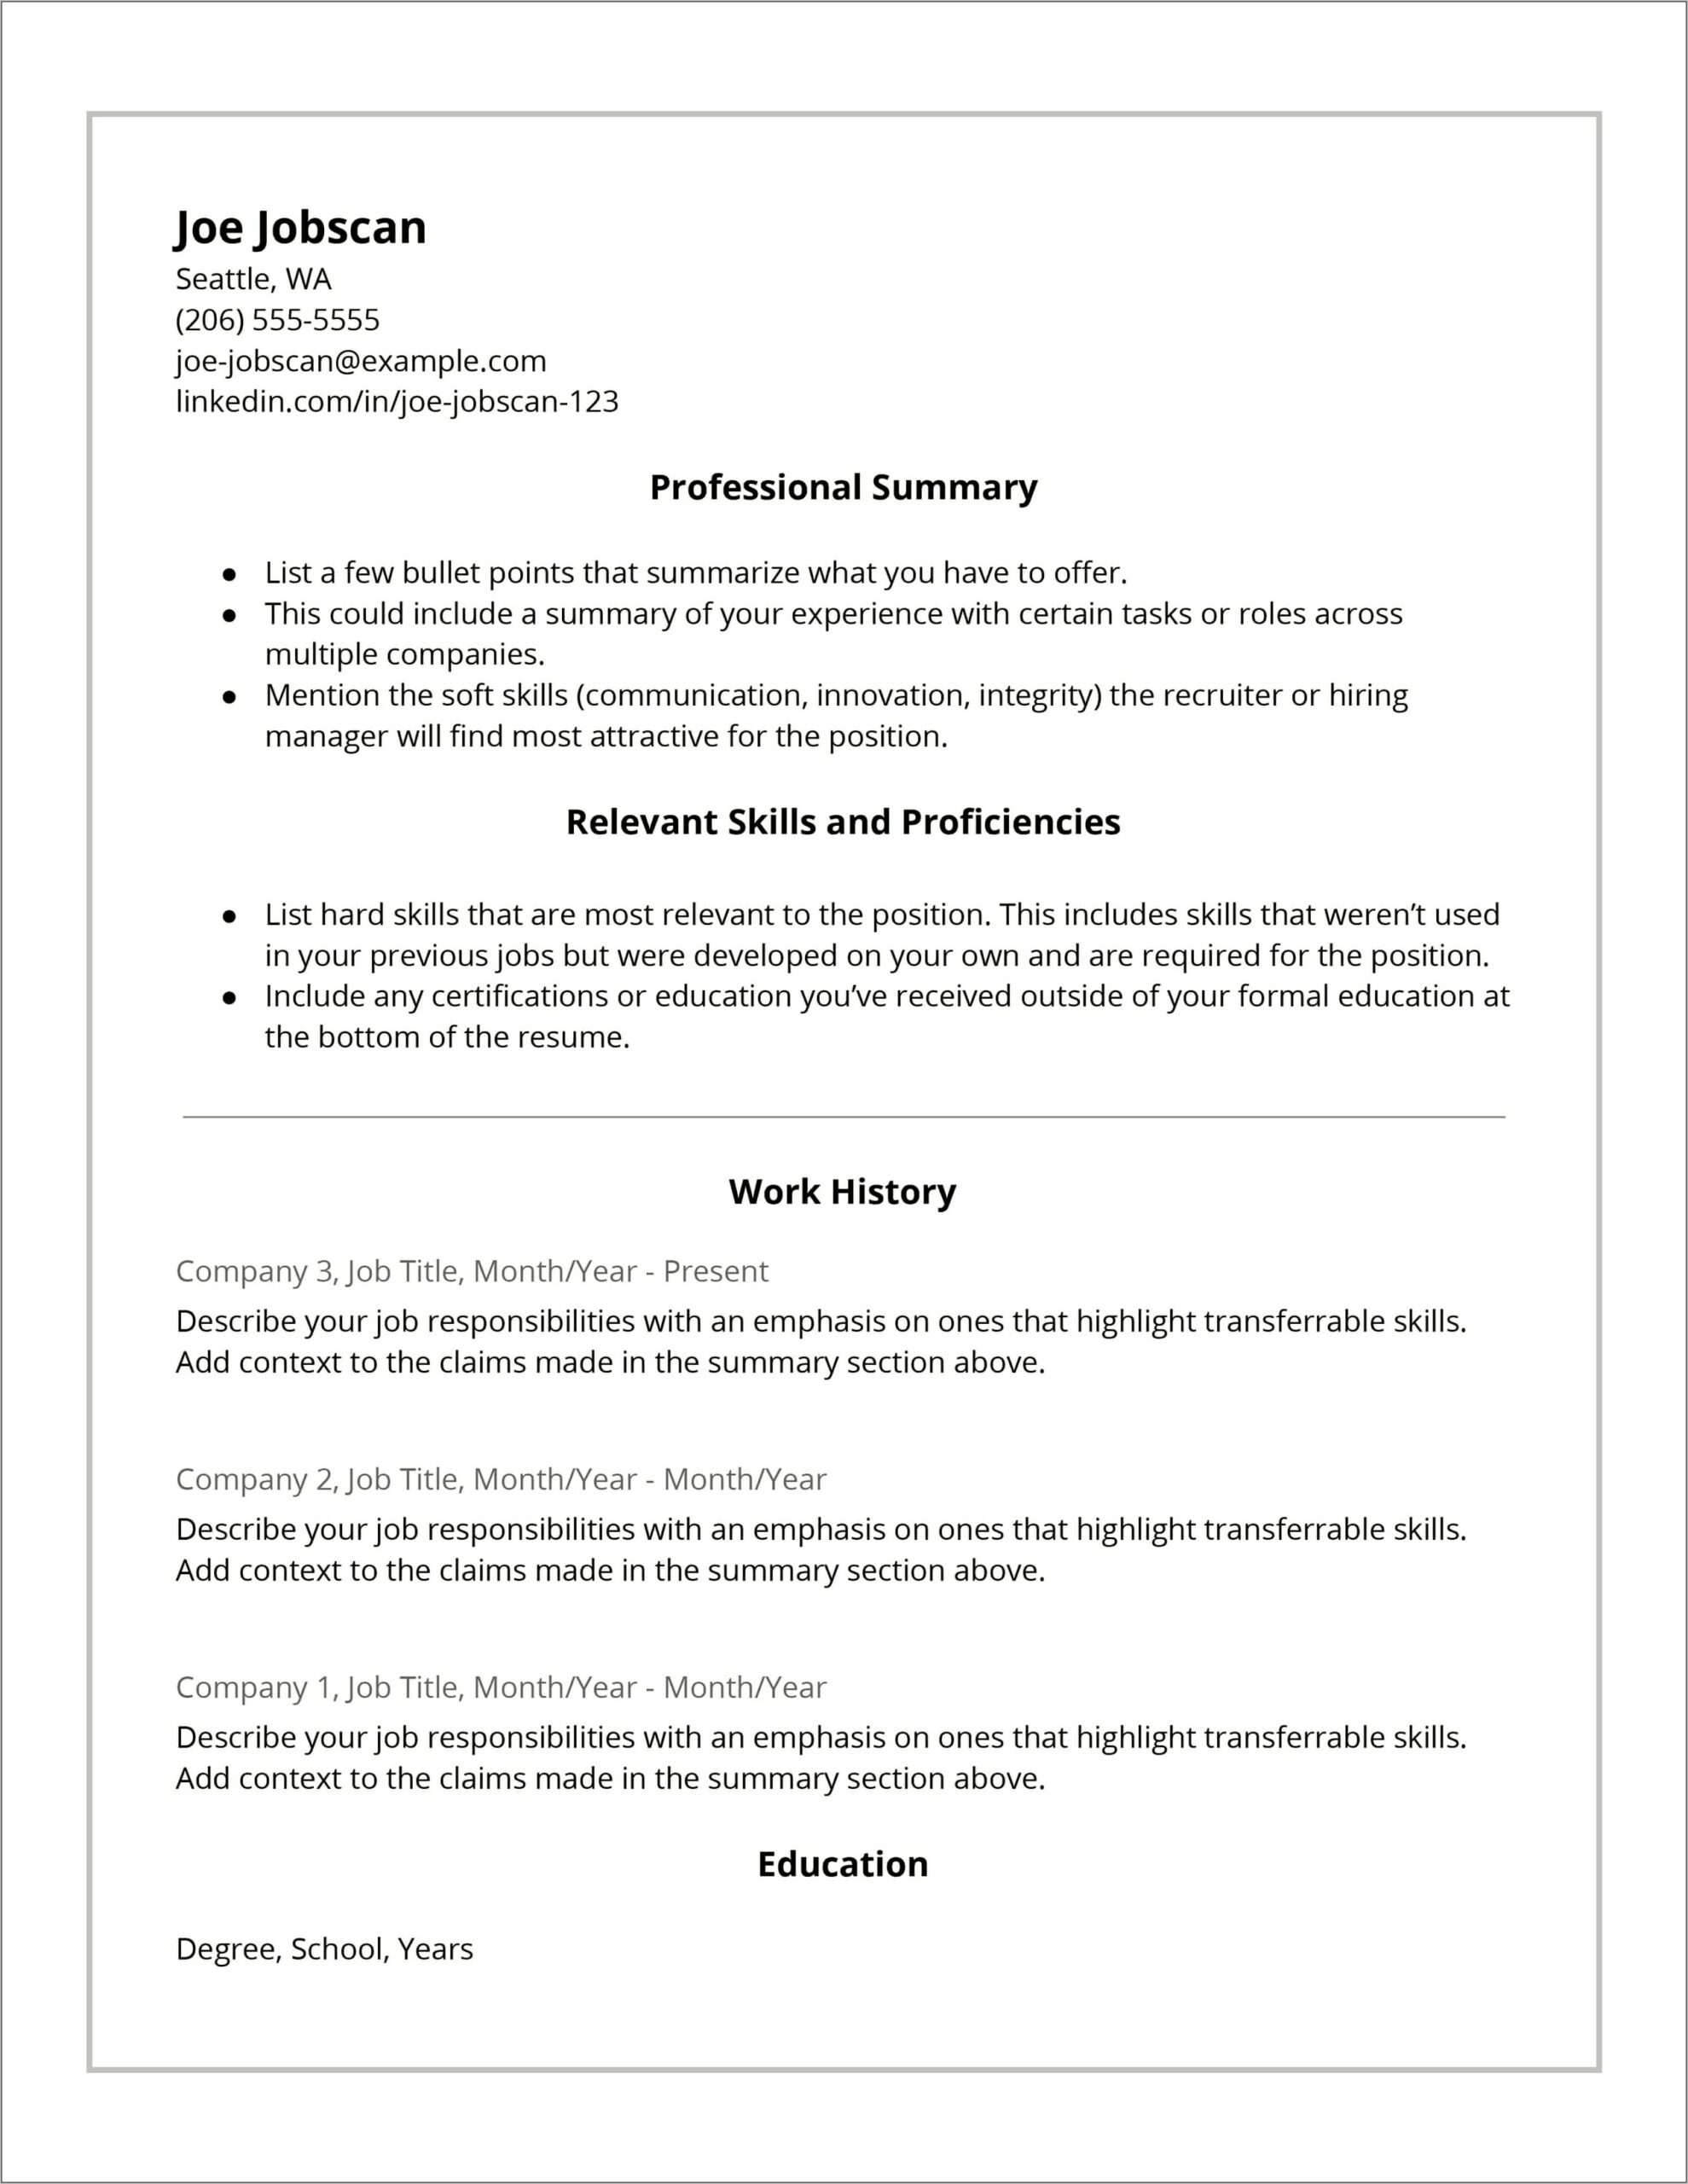 Sample Resume With Multiple Positions At Same Company